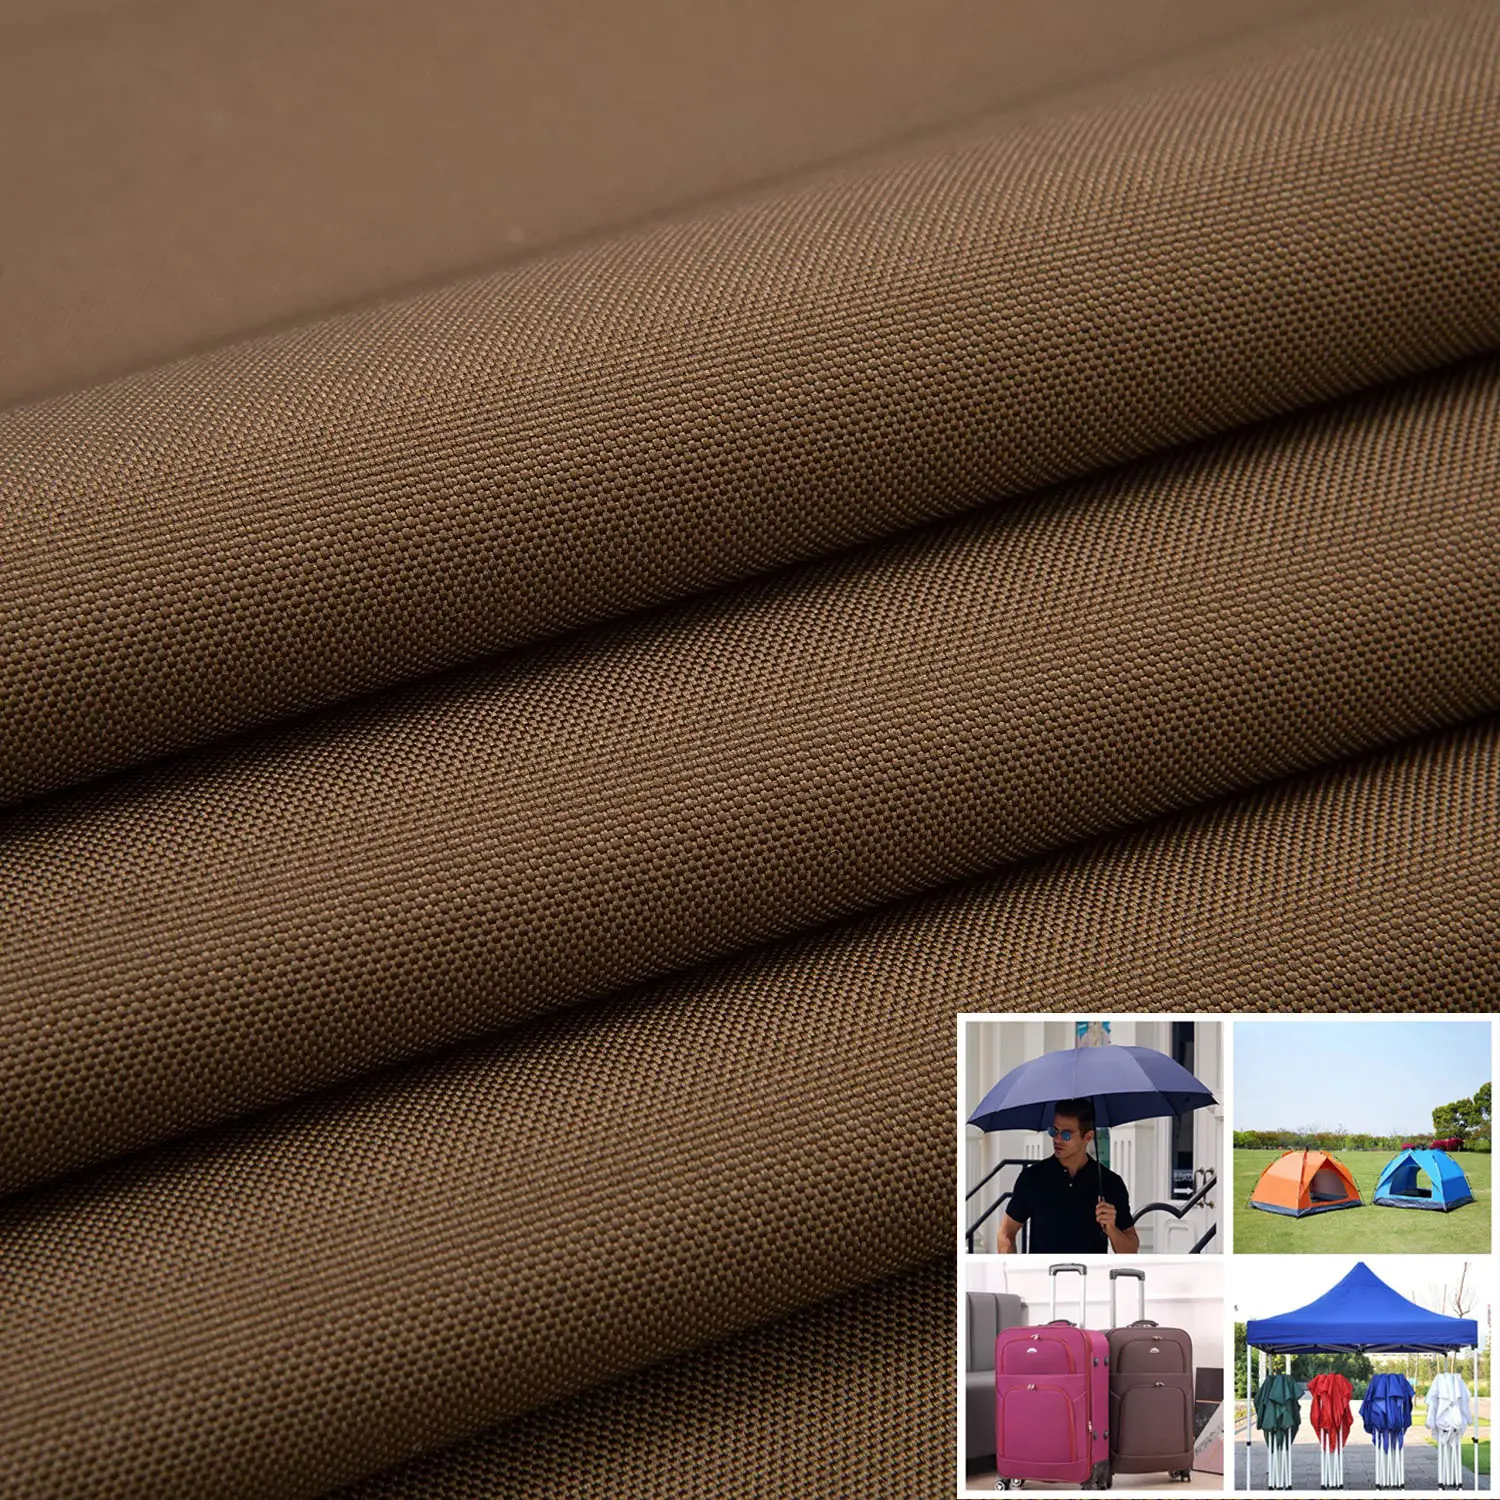 High quality 100% polyester 300D 600D 900D 1680D waterproof brown solid color oxford fabric for Tents  Bags